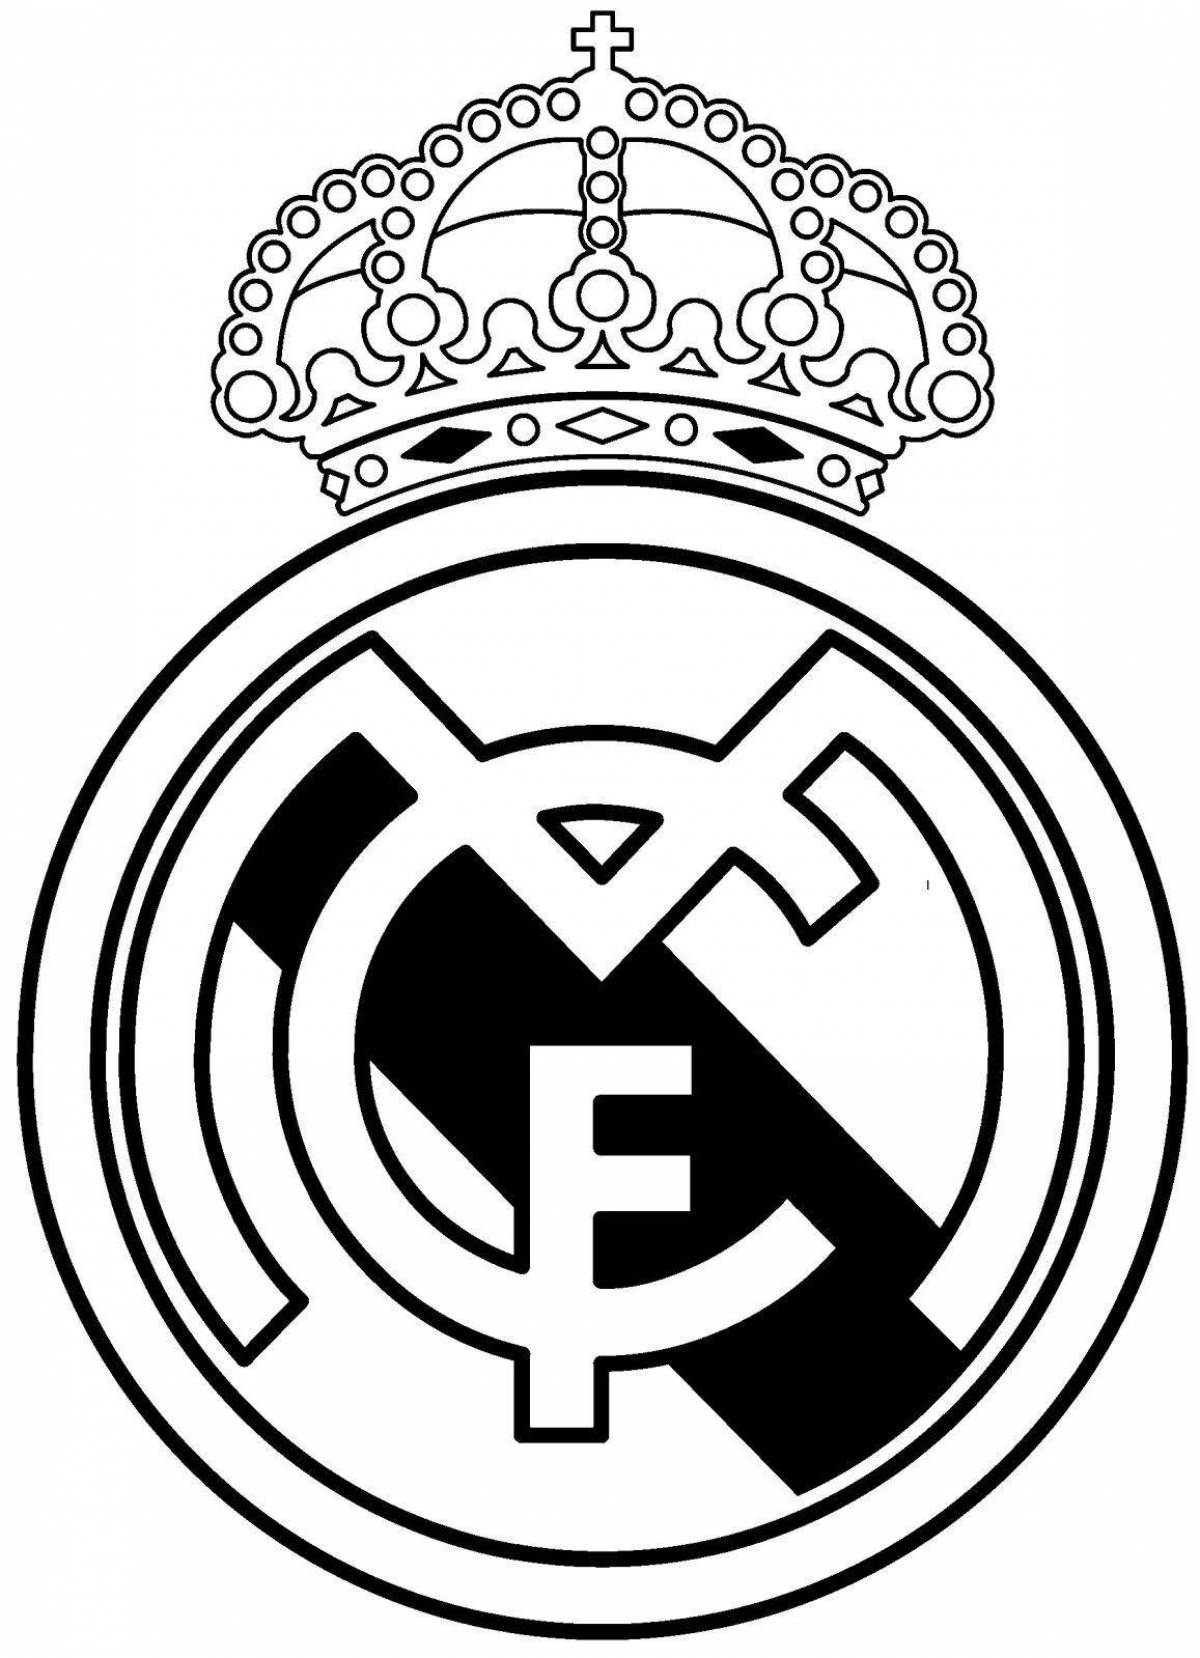 Coloring of glorious real madrid